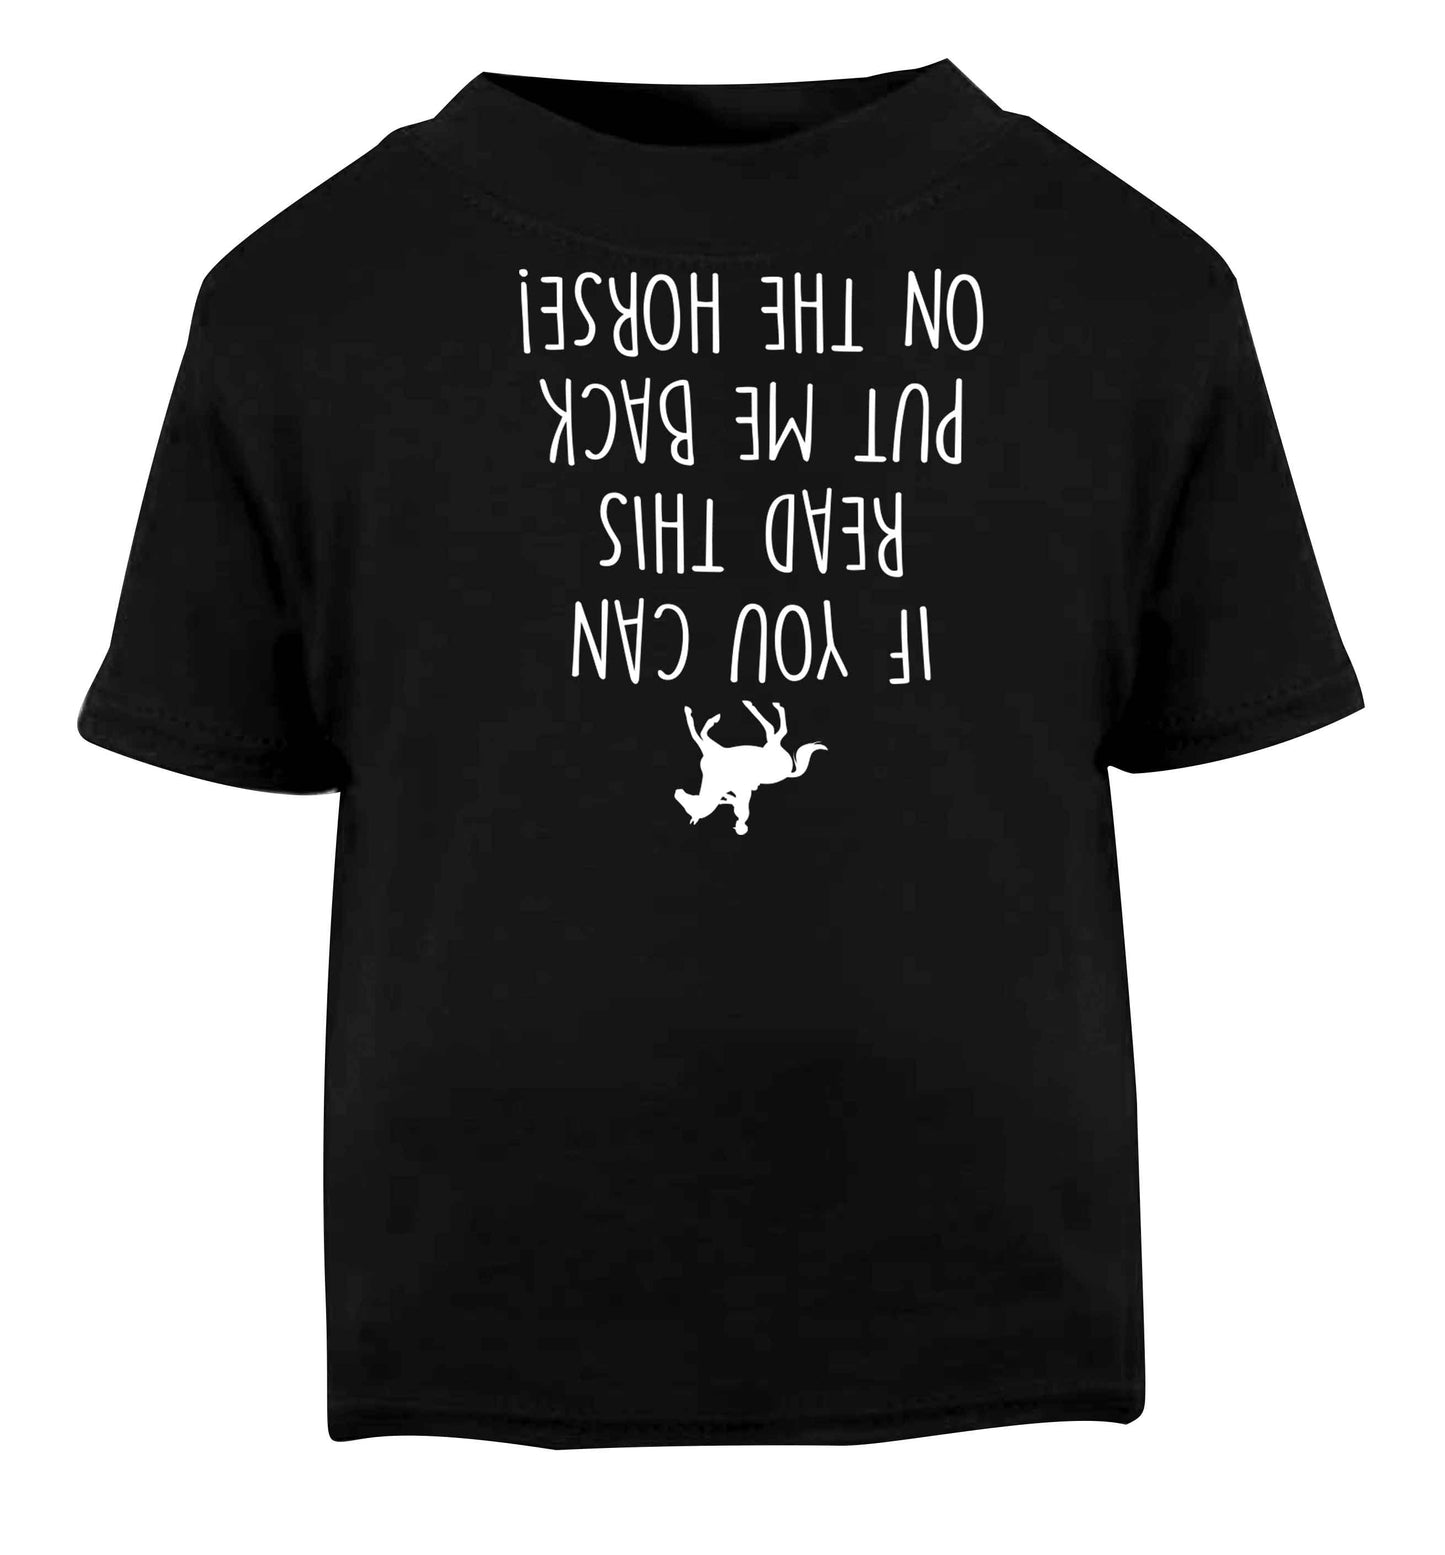 If you can read this put me back on the horse Black baby toddler Tshirt 2 years